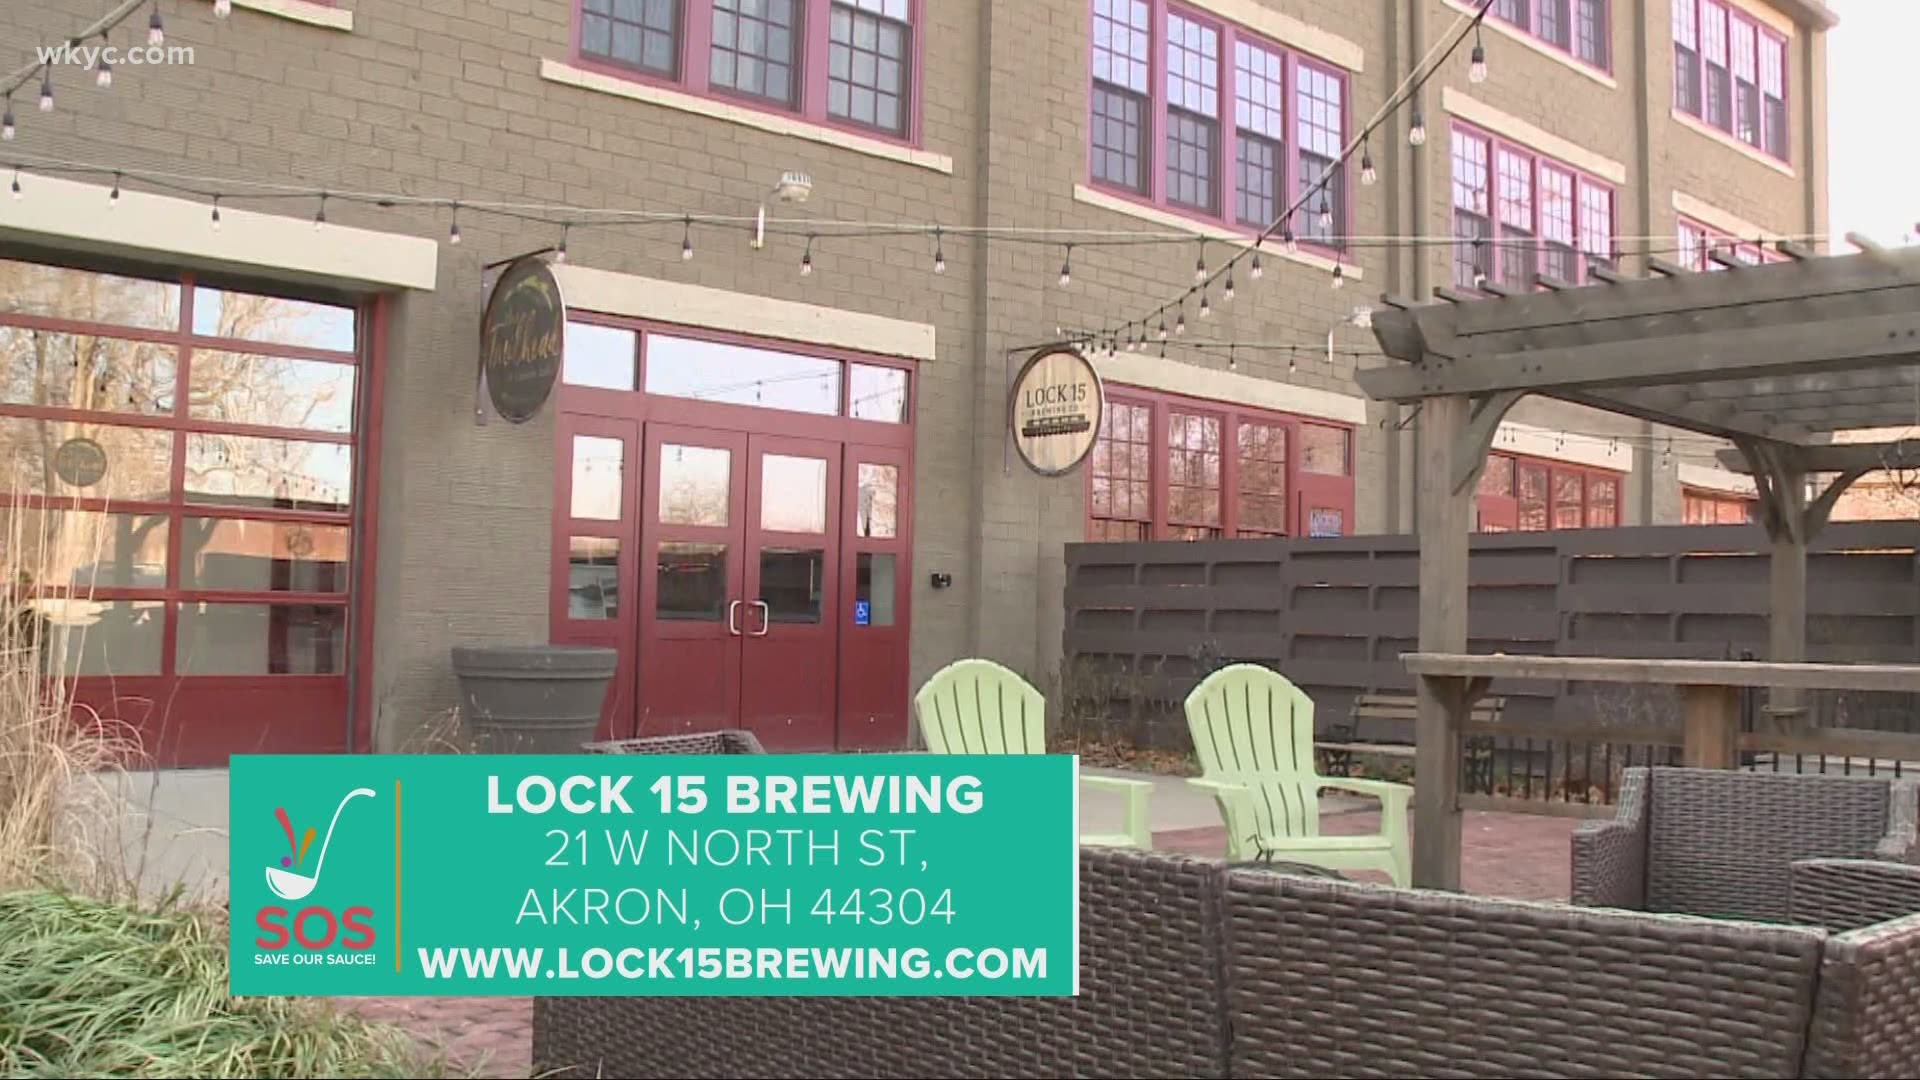 We're highlighting Lock 15 Brewing Co. in Akron as the 'Save Our Sauce' campaign in support of Northeast Ohio restaurants continues.